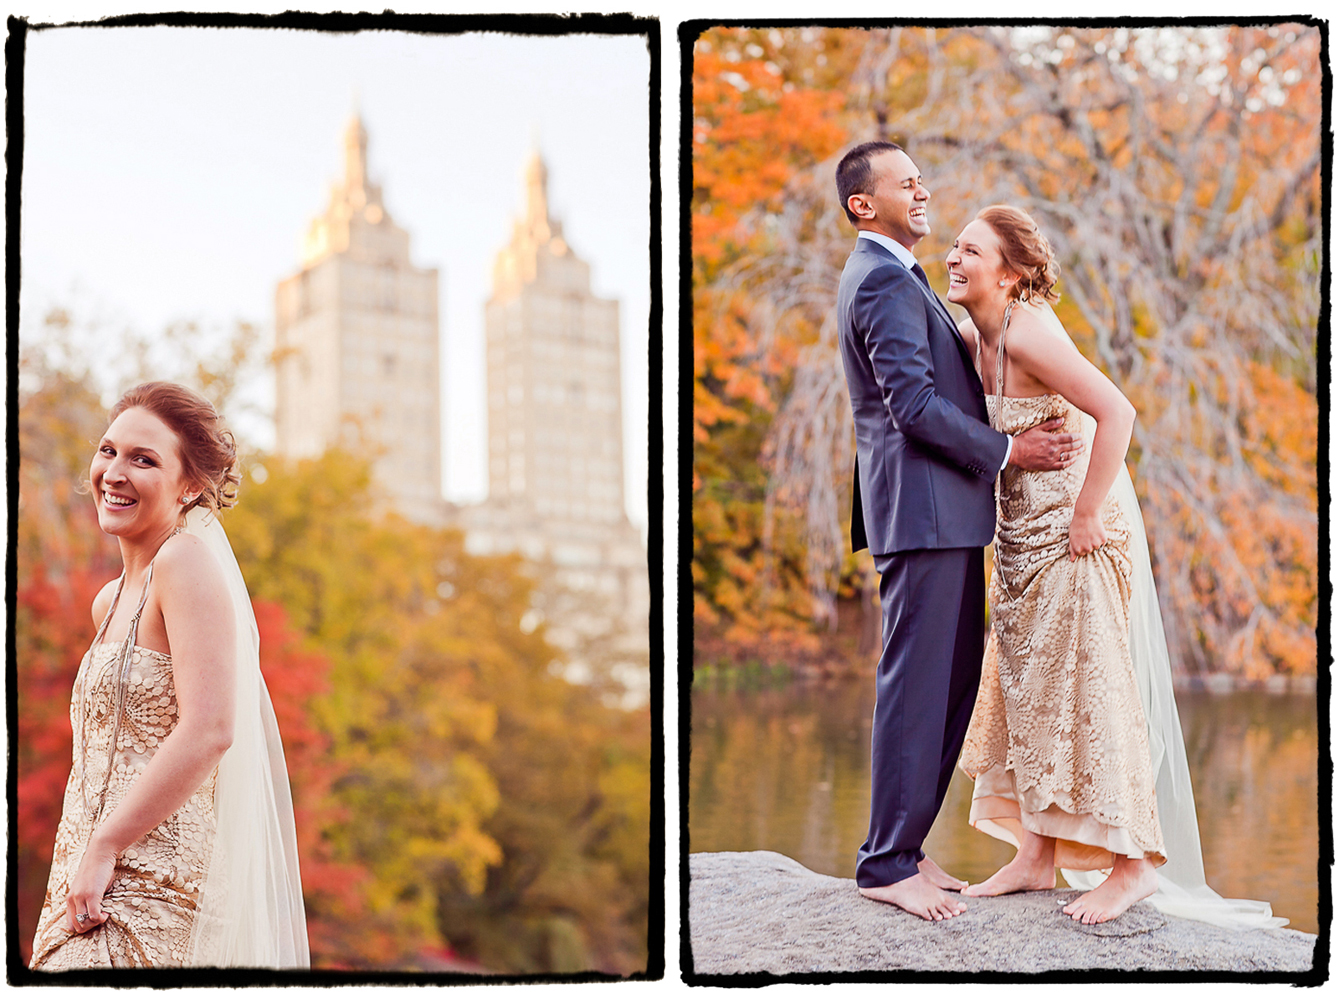 After a fall elopement in Central Park we took some time to walk around and make some beautiful photographs.  I loved how the colors of the fall foliage were complementing the warth of this bride's gown.